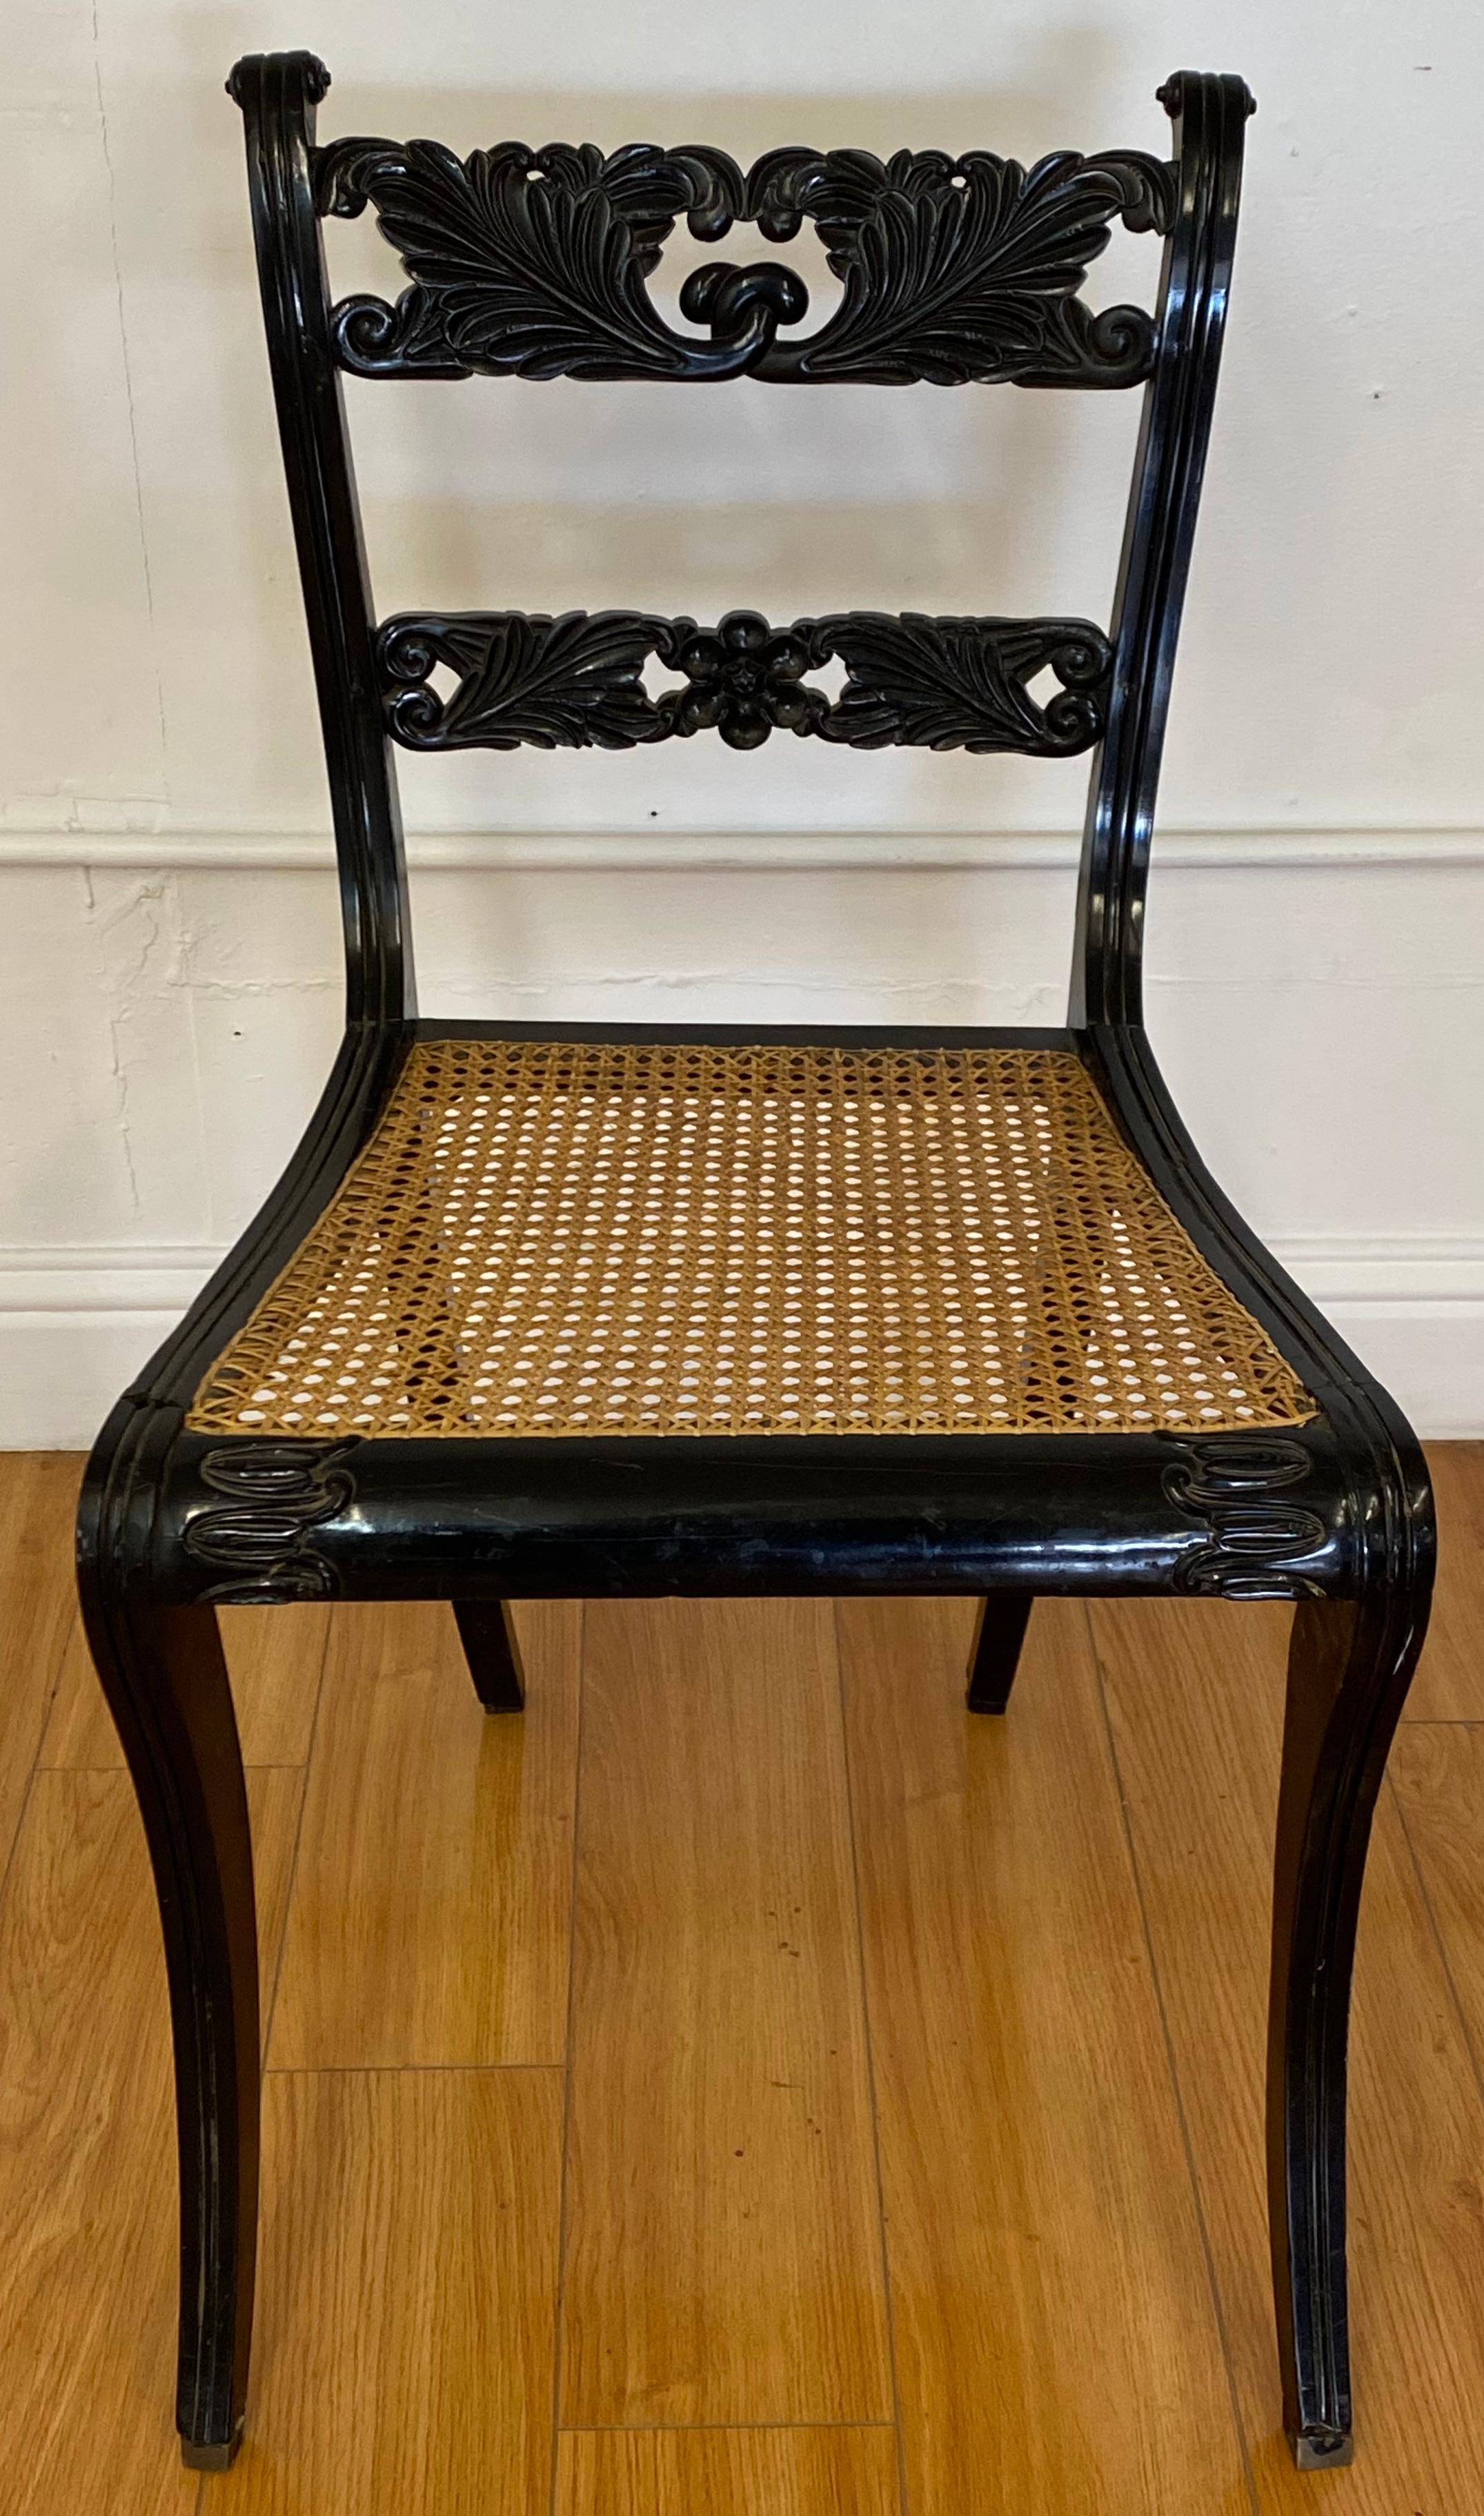 19th Century Trafalgar Upright Chair with Cane Seat & Floral Motif c.1830 For Sale 1